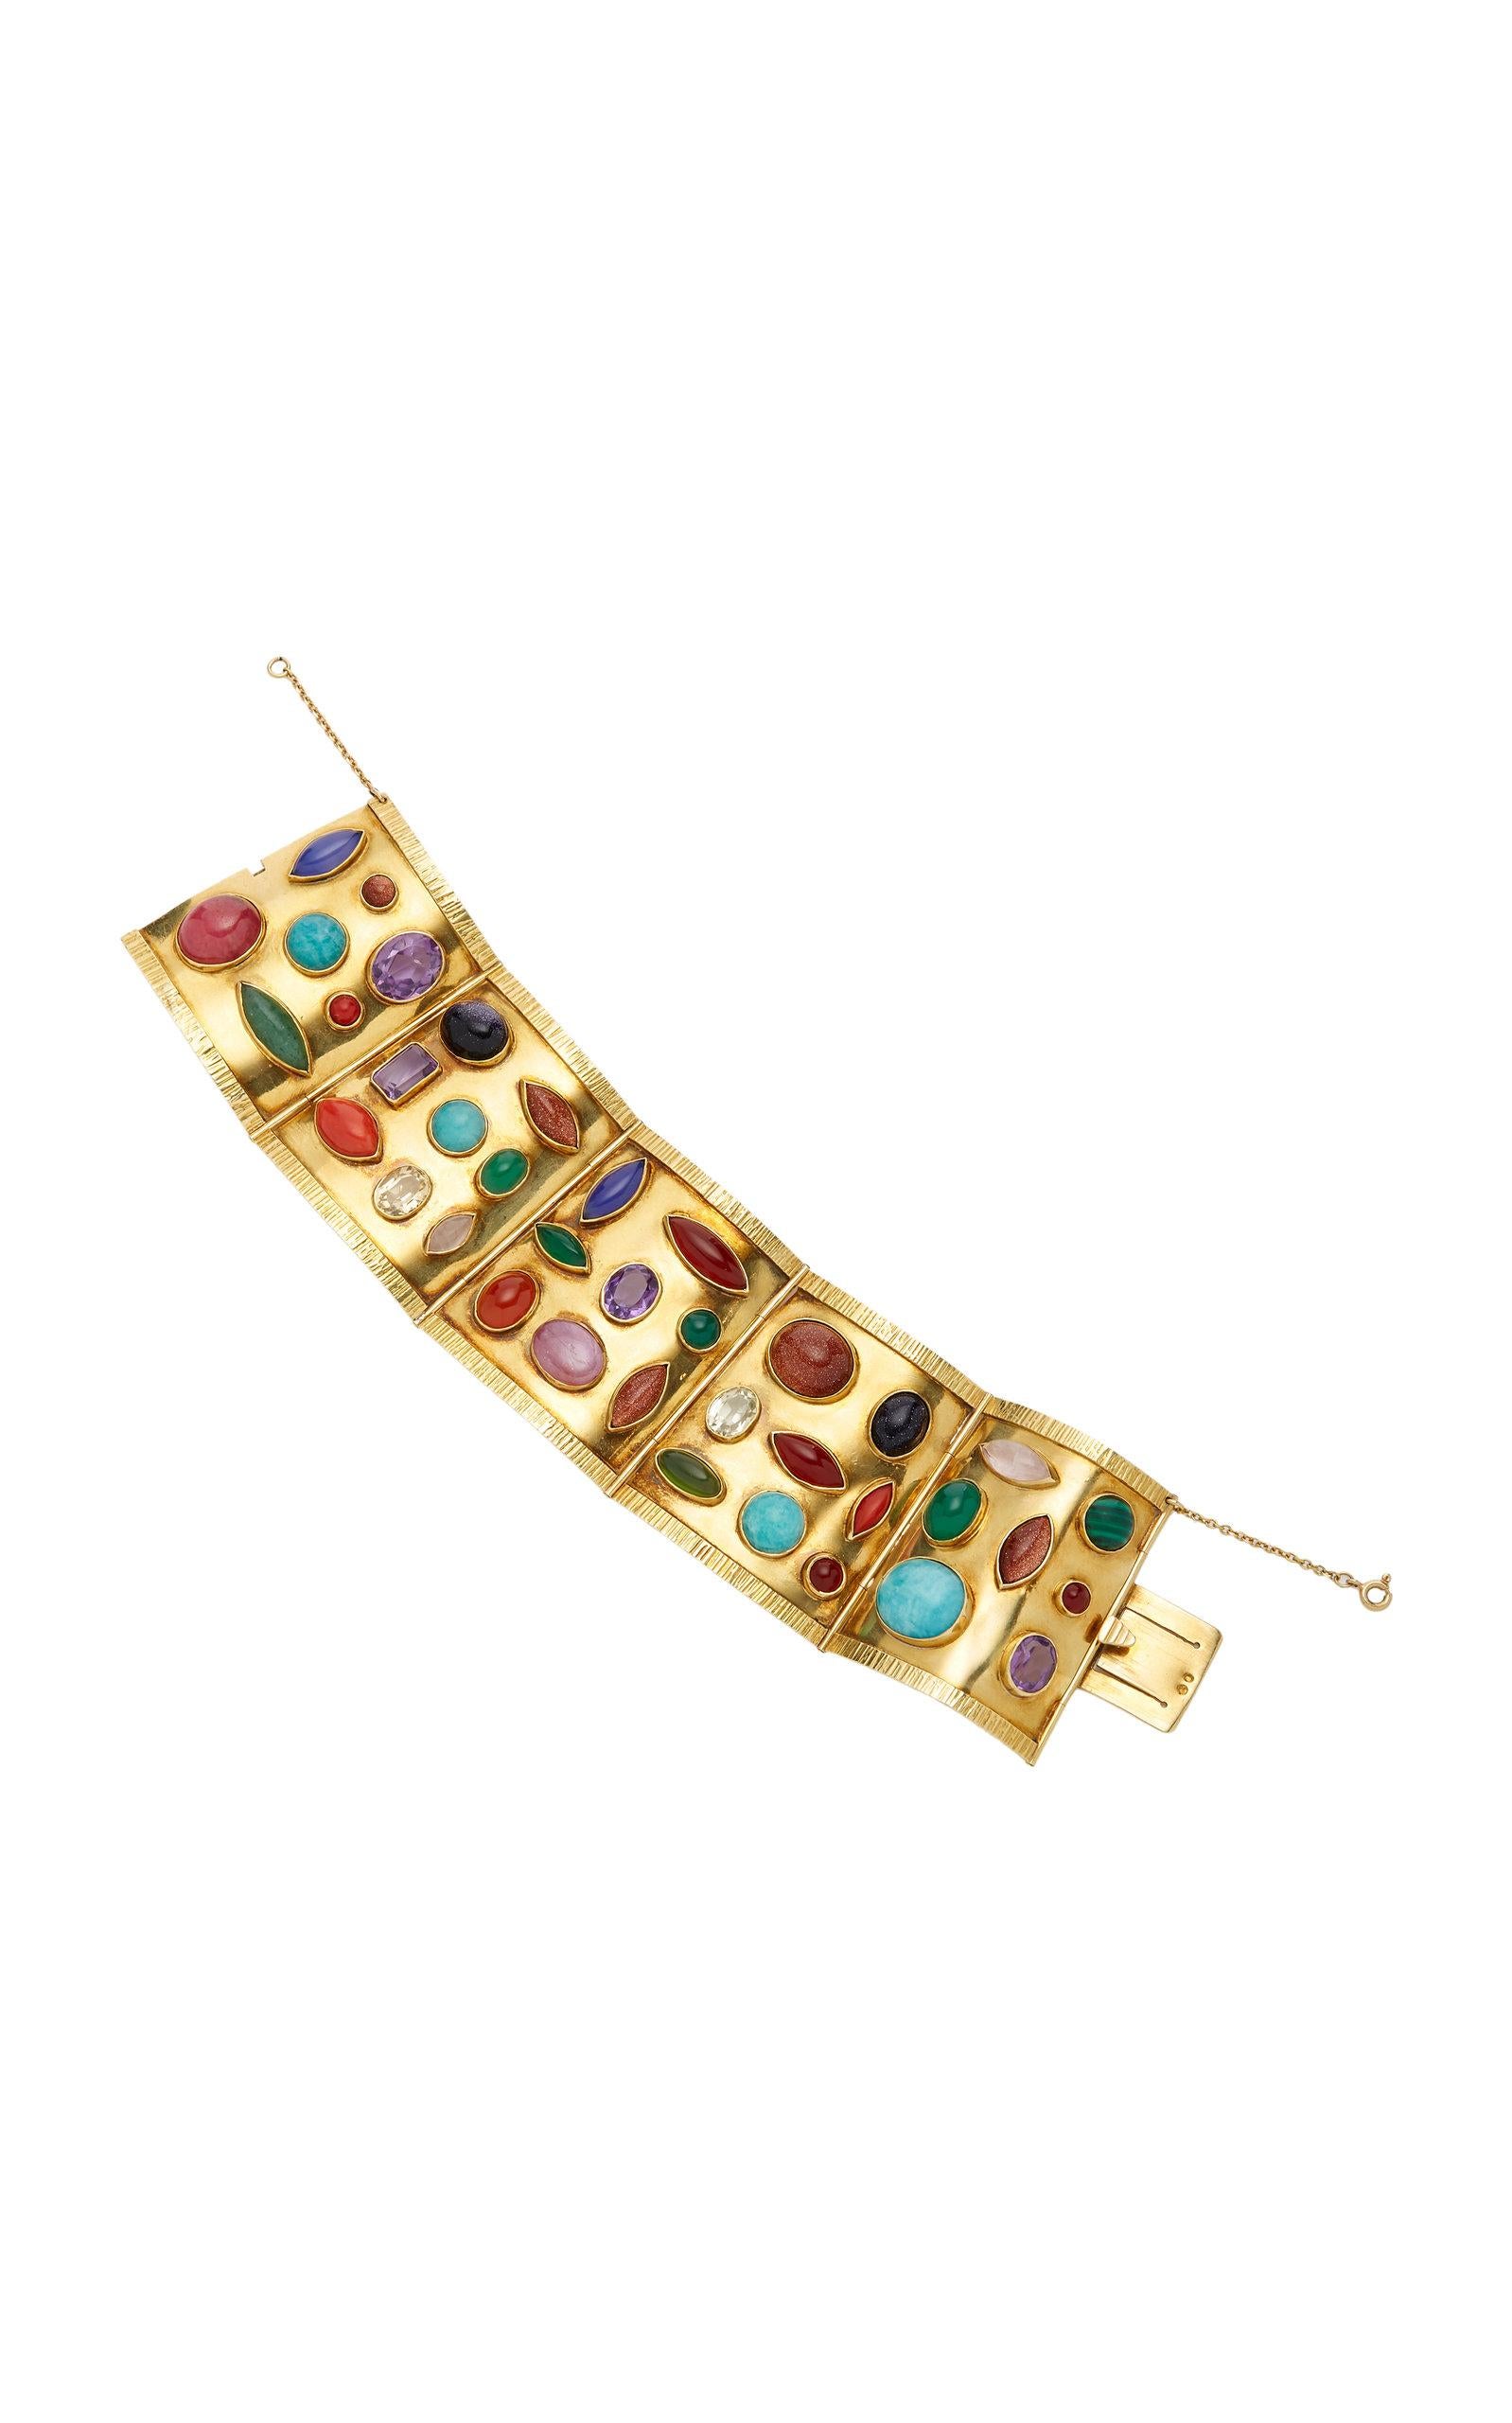 Sanz bracelet in 18kt yellow gold with oval, emerald-cut and fancy-shaped cabochon amethysts, yellow and colorless stones, goldstone, rhodochrosite, carnelian, malachite, chalcedony, coral and amazonite. Mad in Spain by esteemed jeweler Sanz, circa